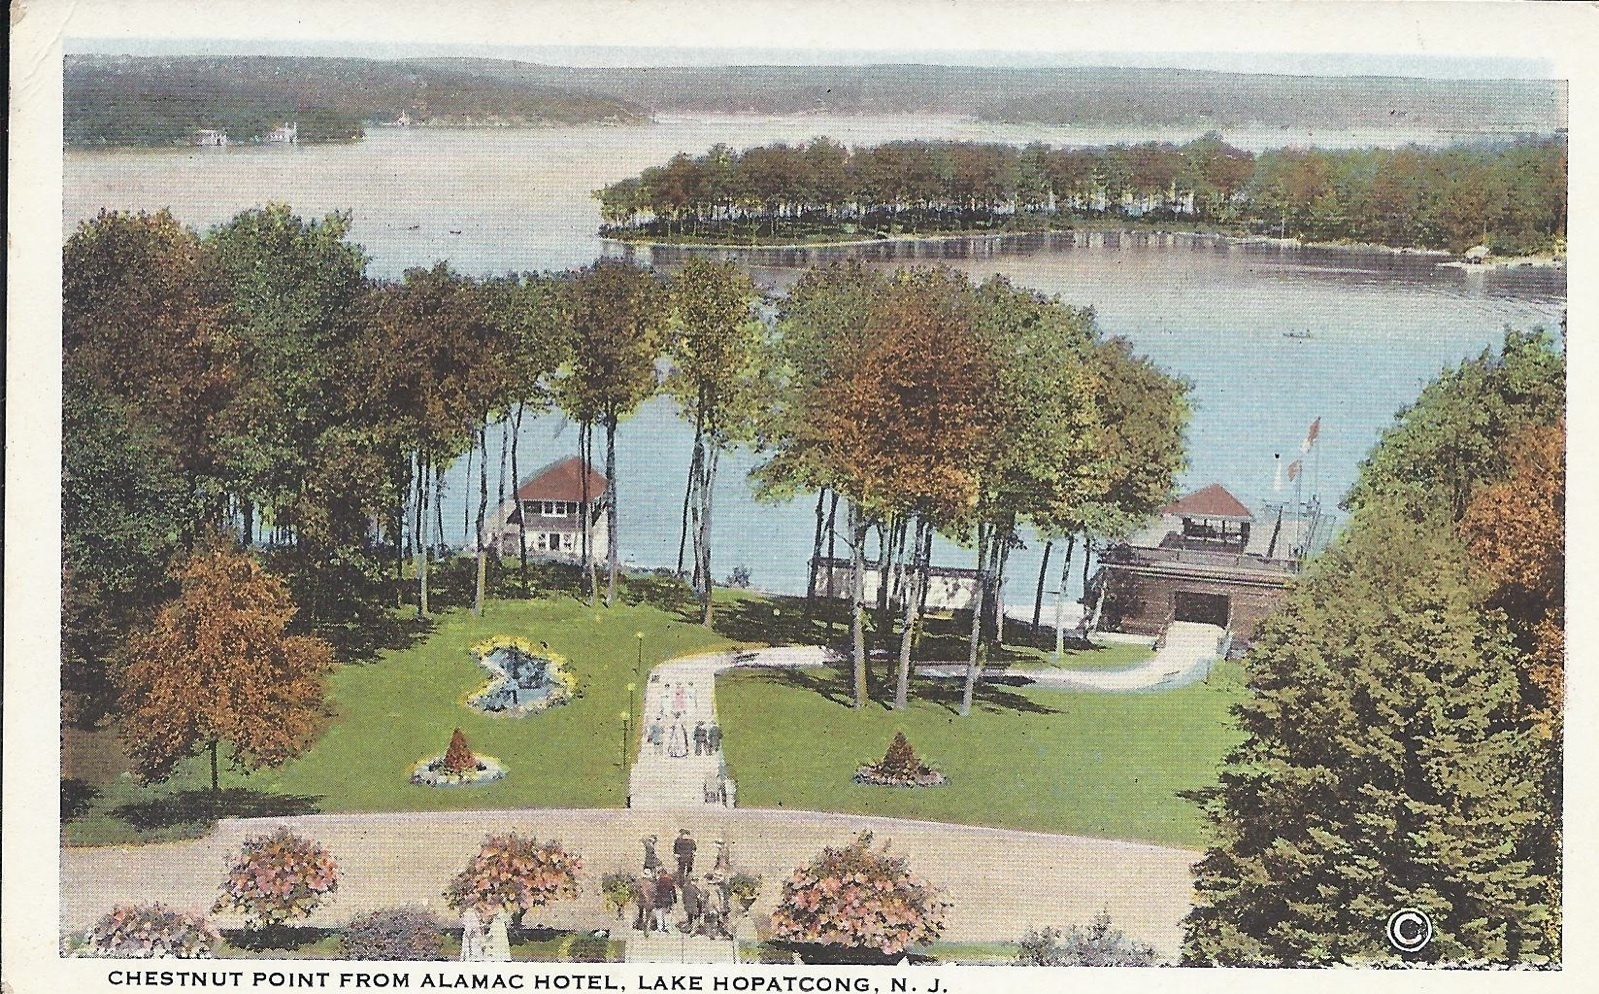 Lake Hopatcong - Chestnut Point from the Alamac Hotel